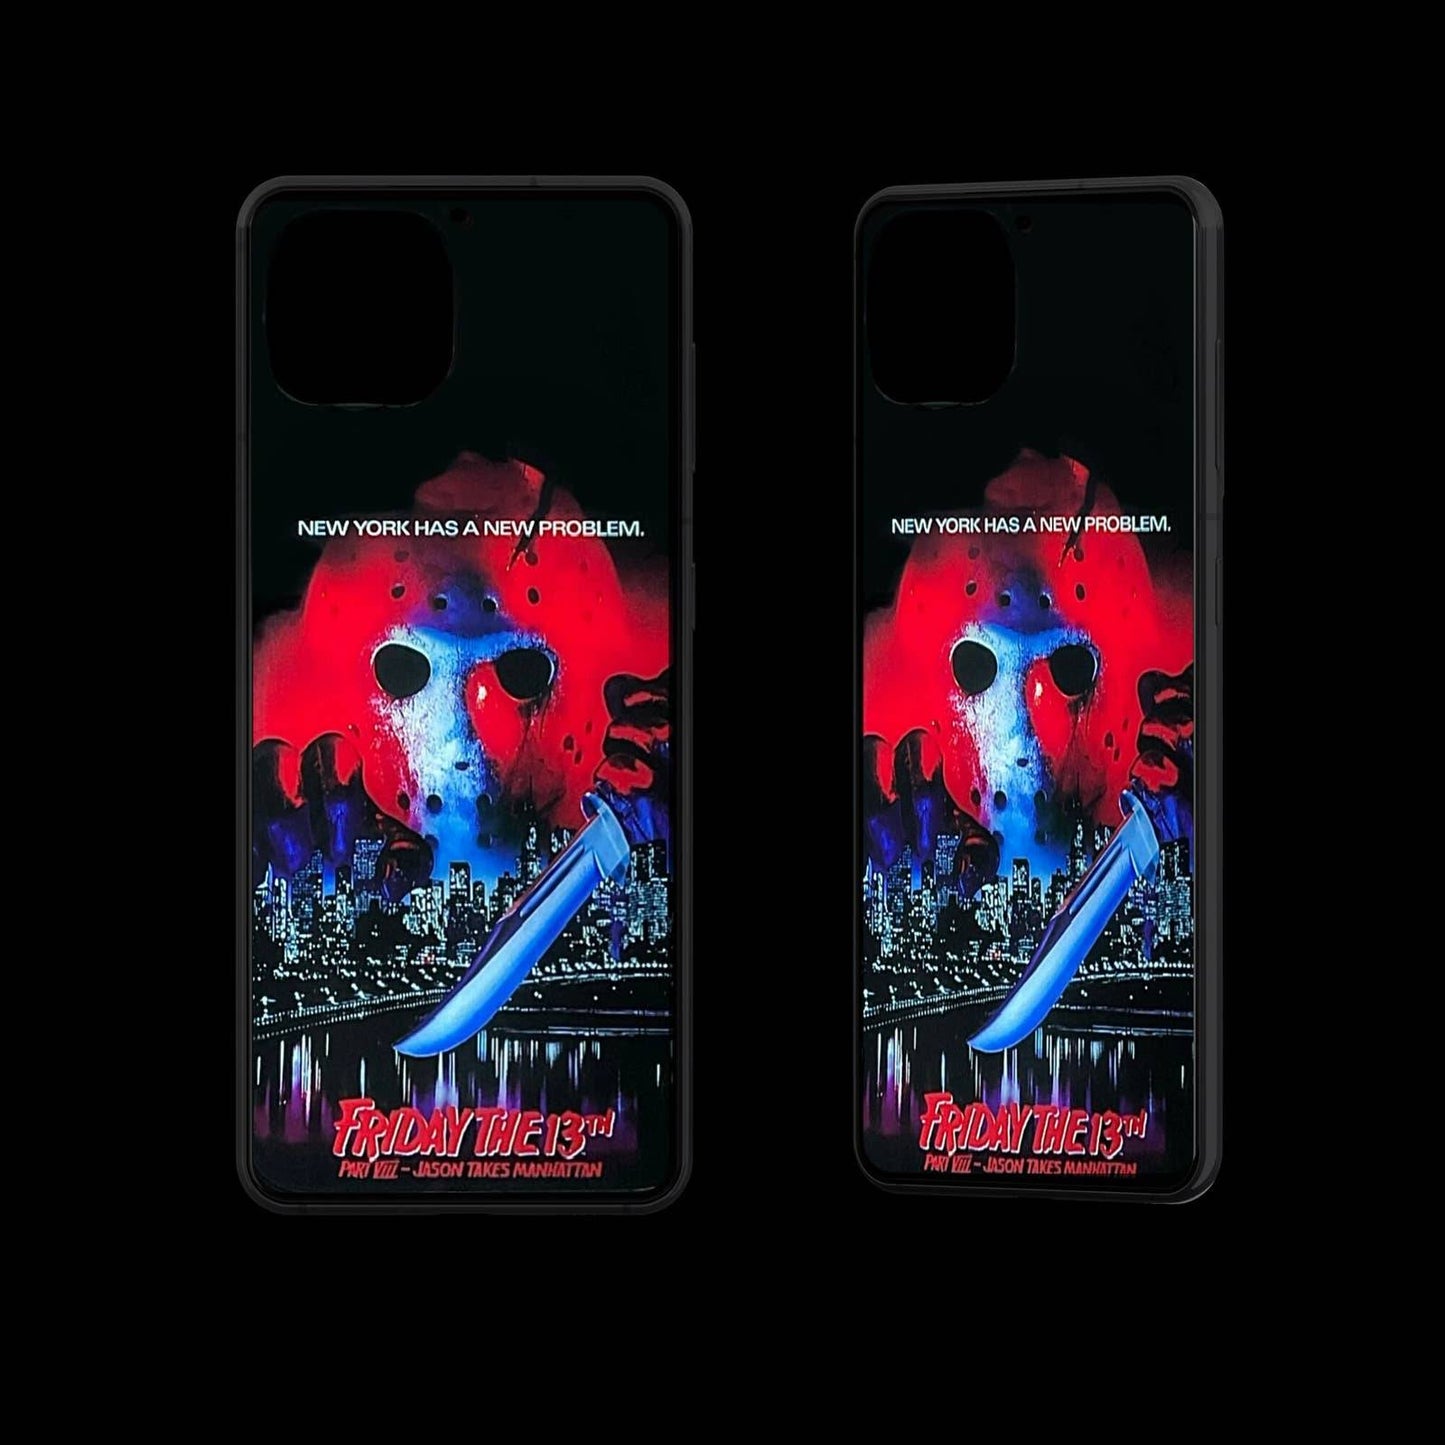 Friday the 13th Part VIII Sound-Activated LED Light-up iPhone Case